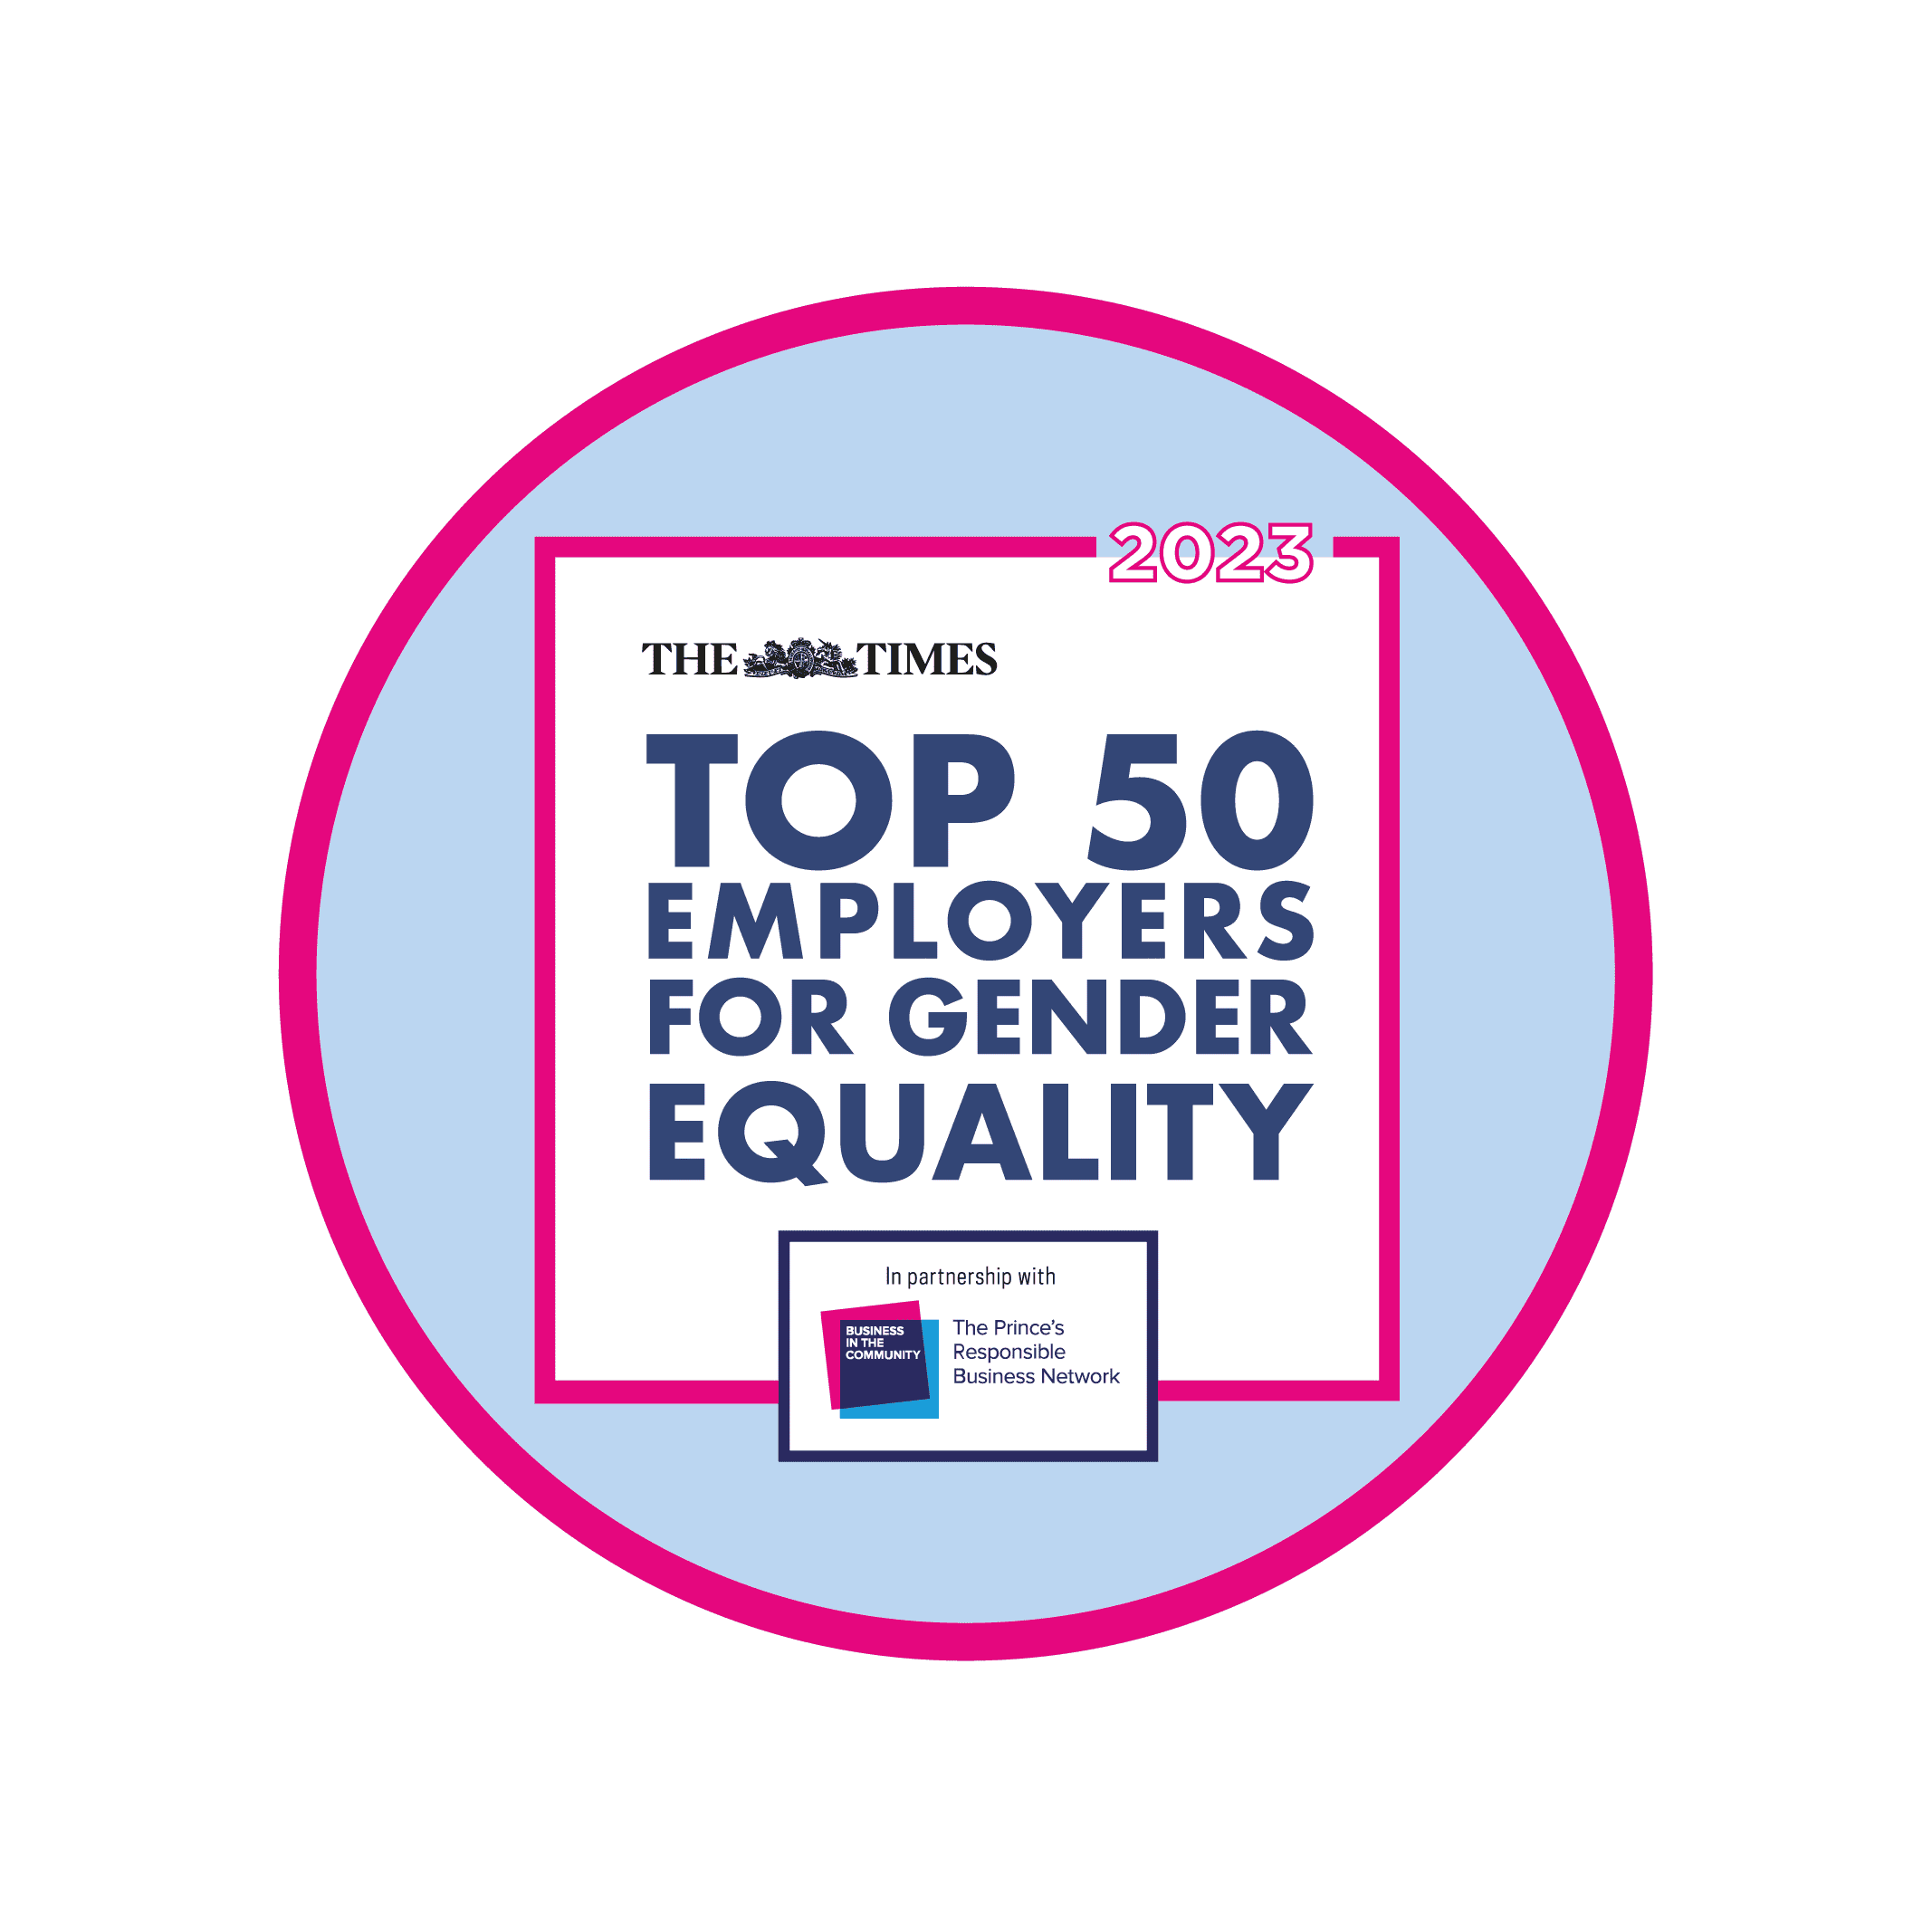 The Times Top 50 Employers for Gender Equality logo on a pale blue background. The class of '23 